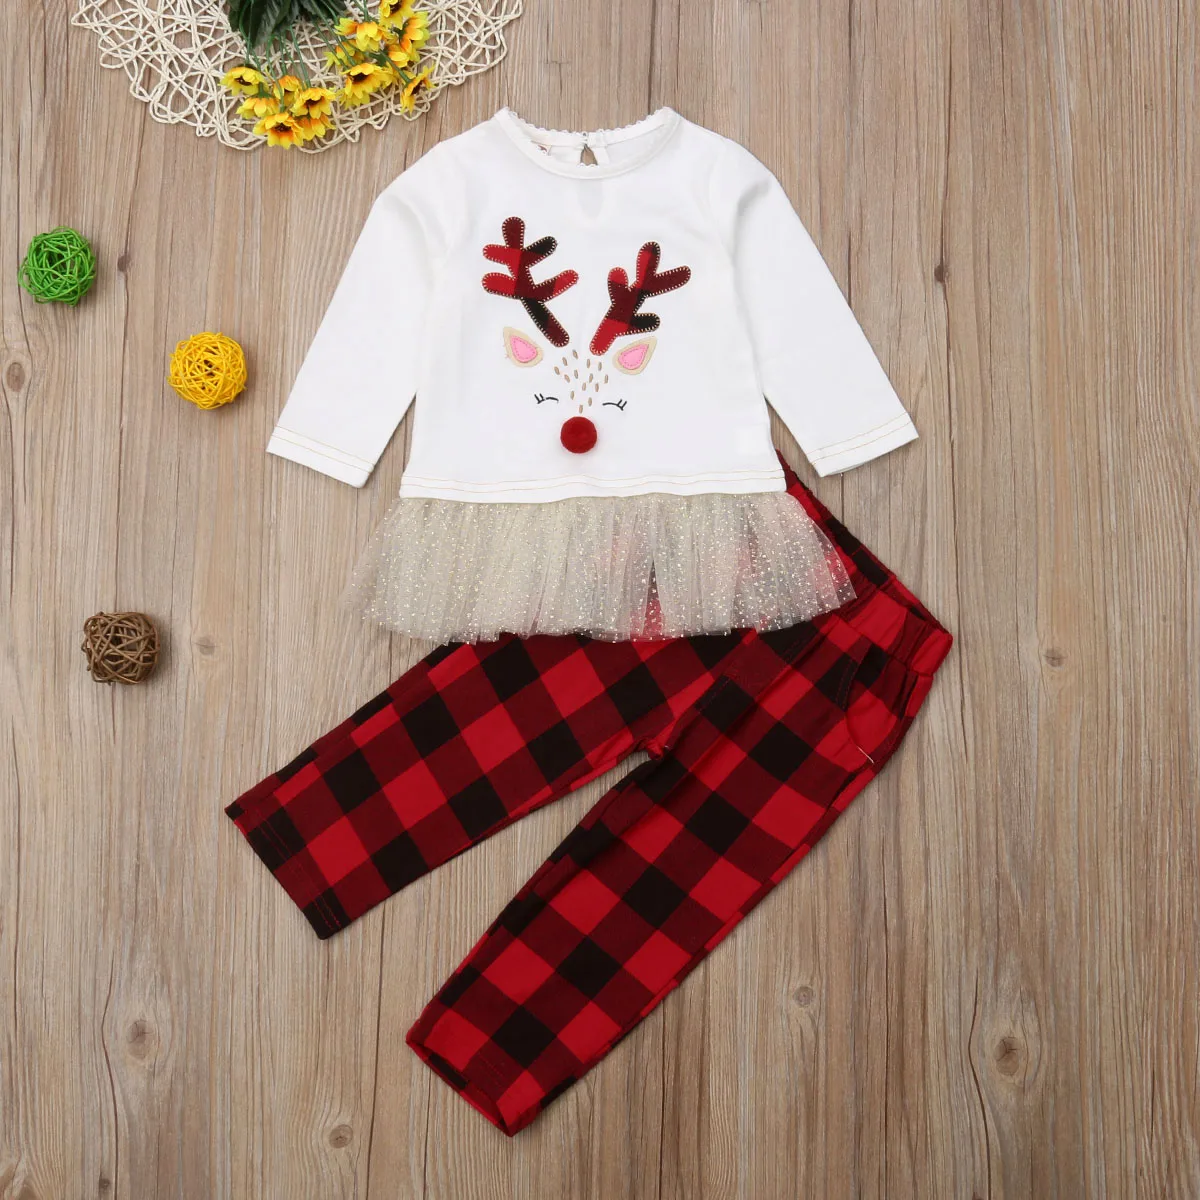 Two Piece Set Toddler Kid Baby Girls Clothes Deer Print Tutu Top+Plaid Long Pants 2pcs Casual Christmas Outfits Winter